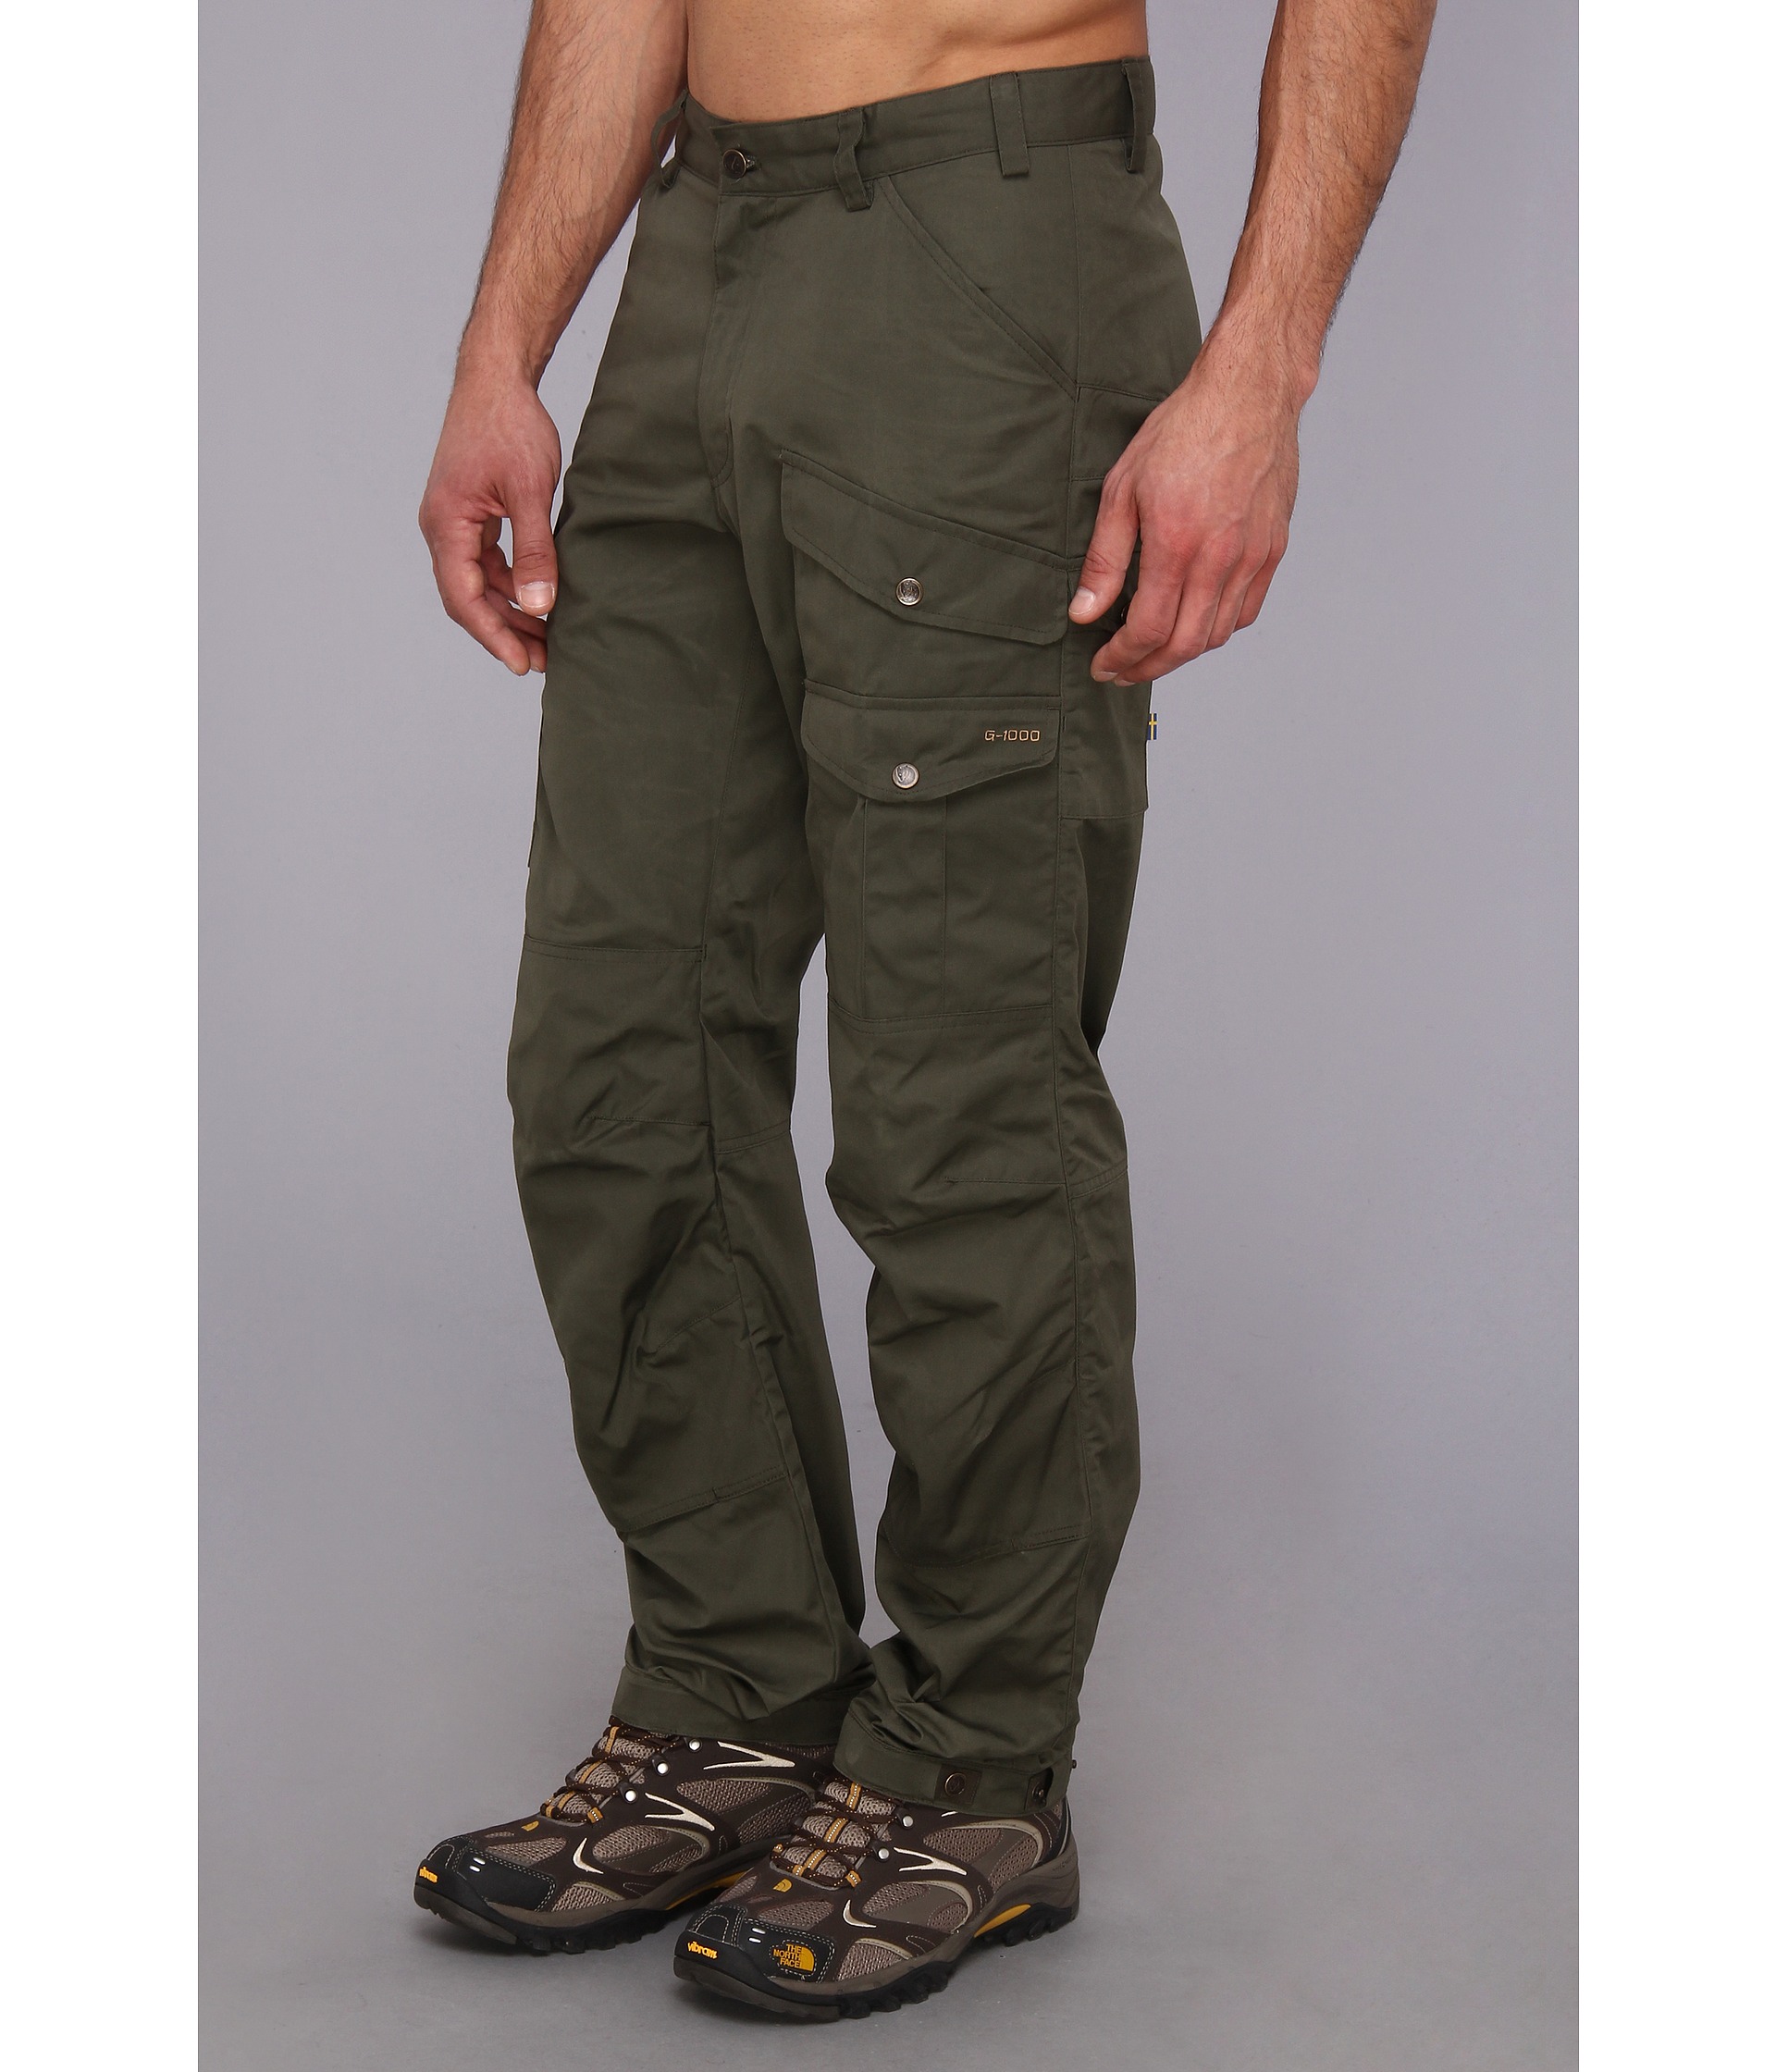 No results for fjallraven greenland pro trousers - Search Zappos.com